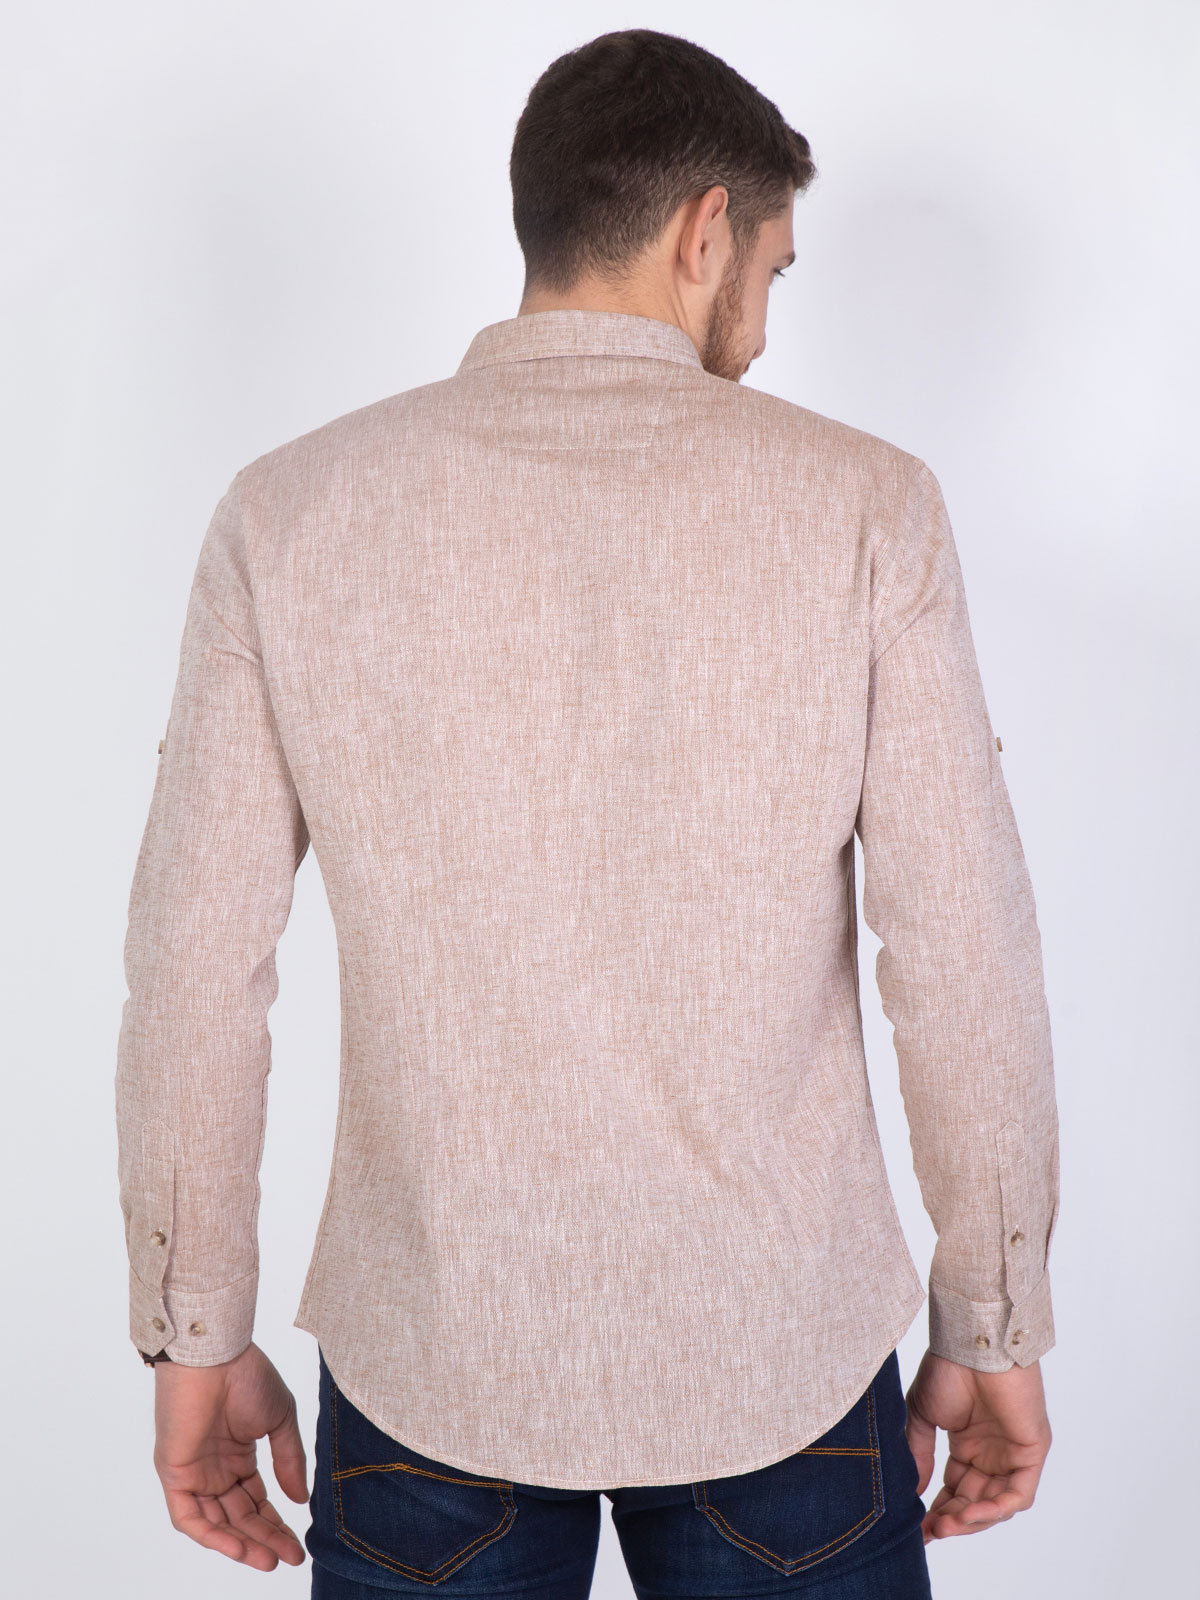 Beige shirt made of linen and cotton - 21486 € 39.37 img4